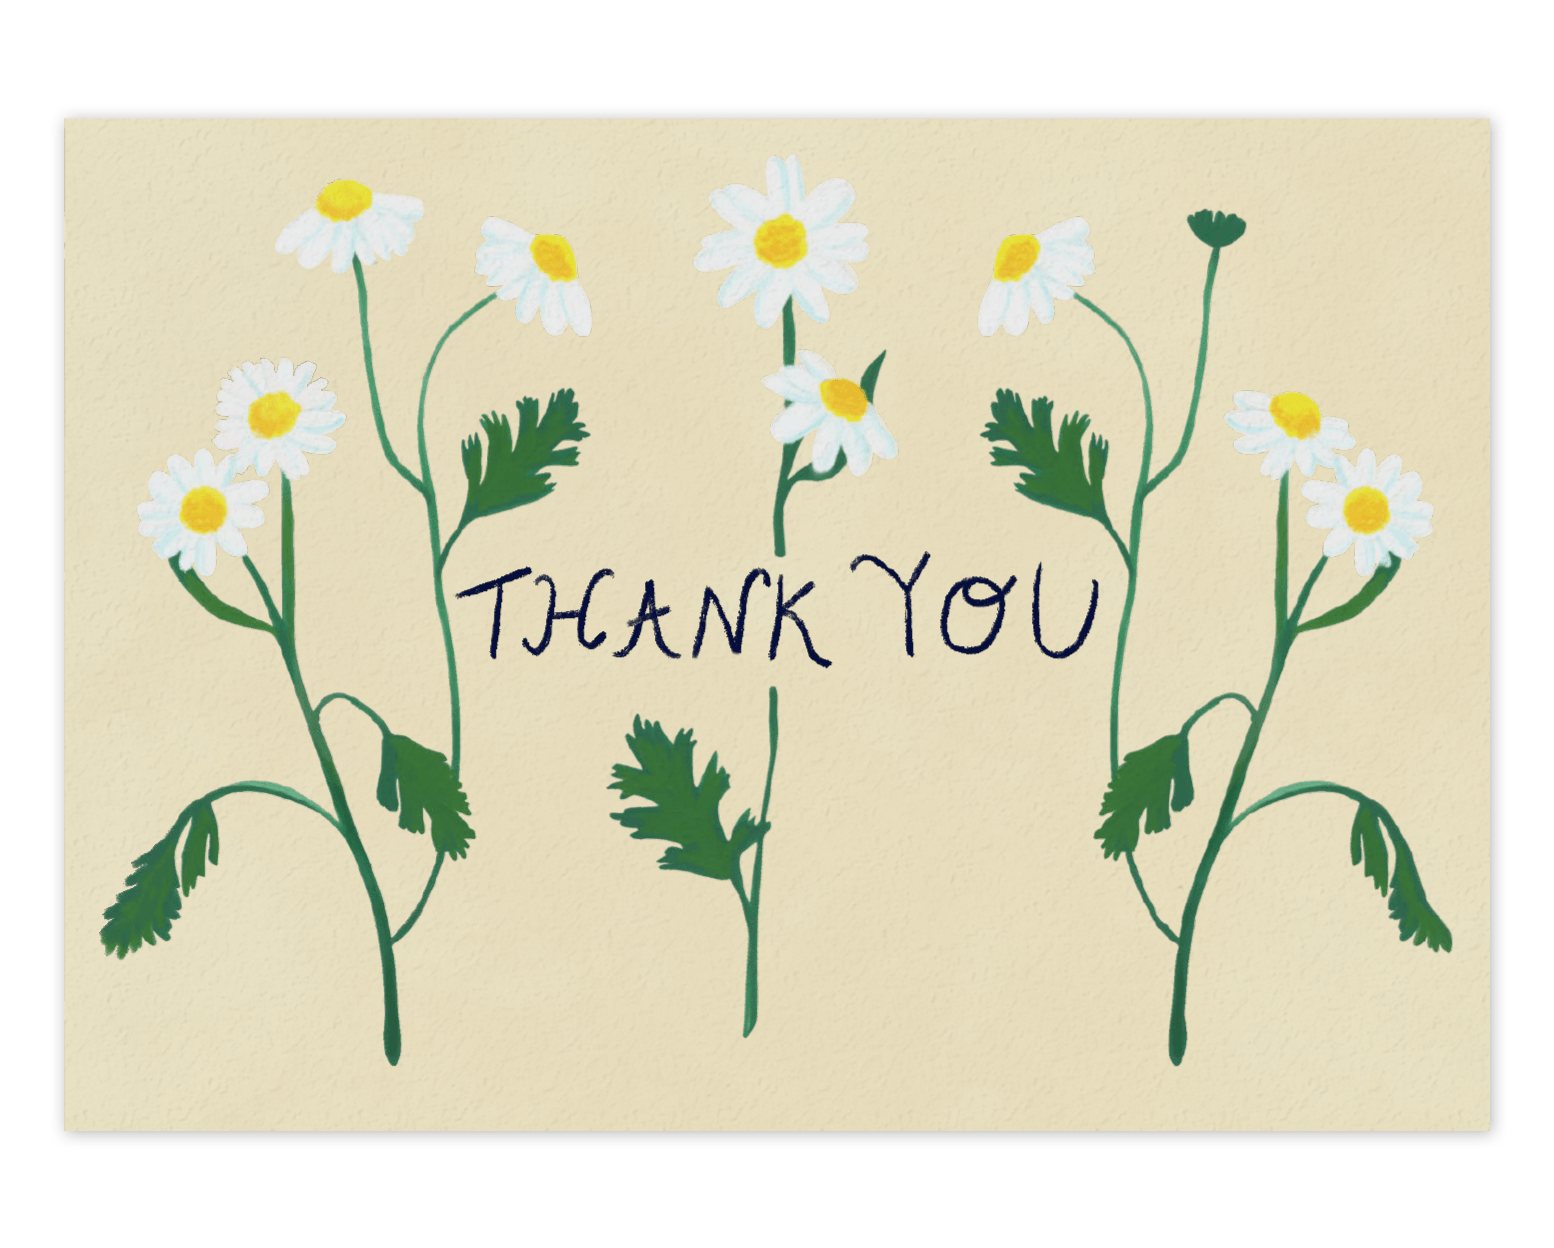  Three stems of lively white forest flowers cover the card nearly top to bottom horizontally, with the words "Thank You" going through the center of them in black ink. This design is printed on a cream colored background. 